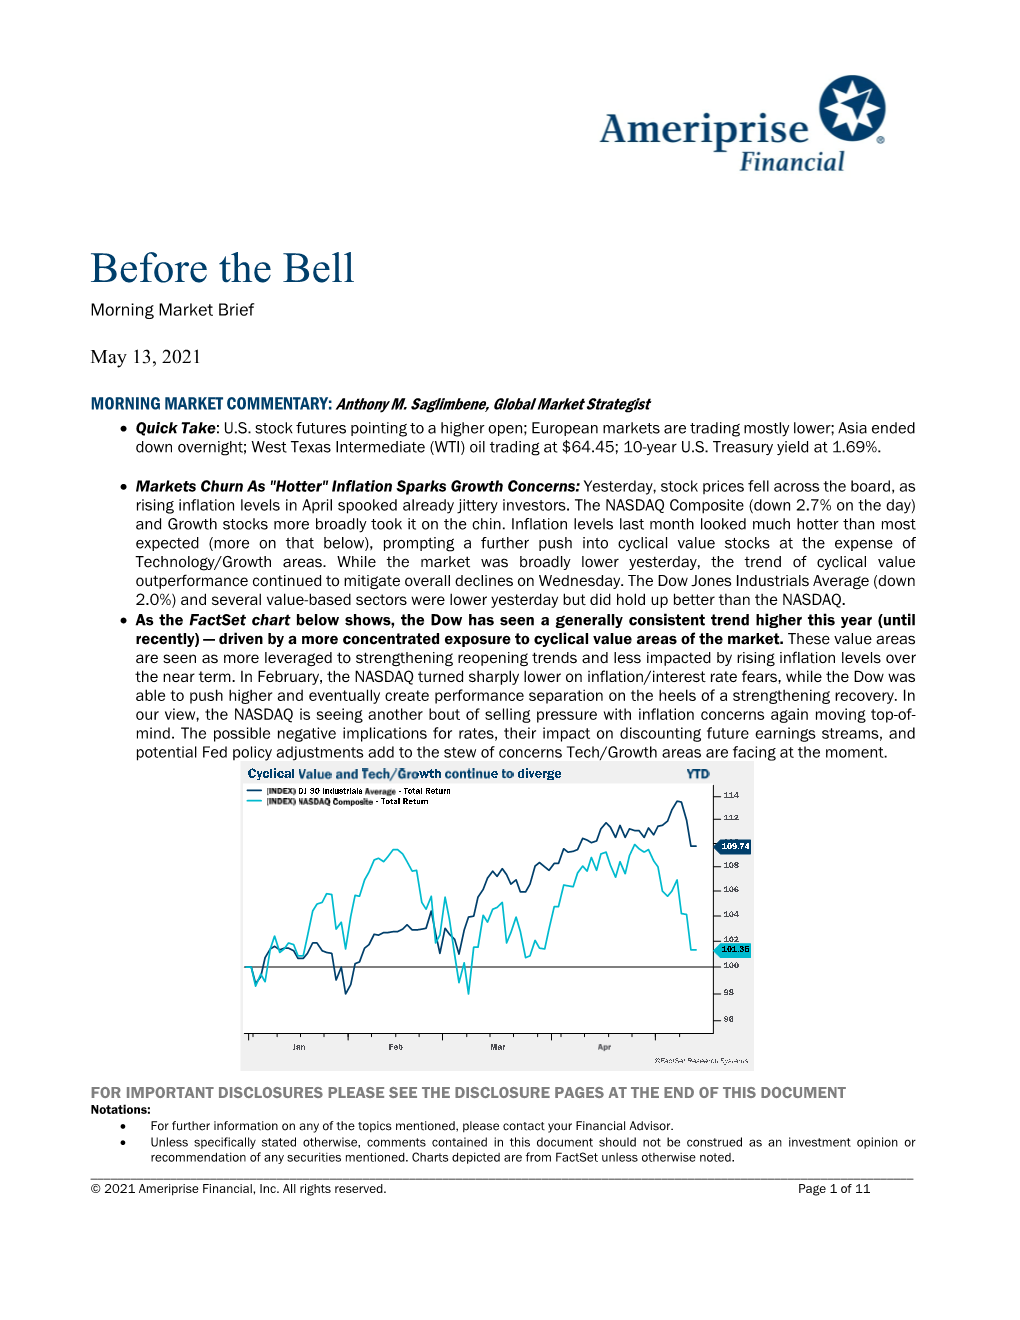 Before the Bell Morning Market Brief